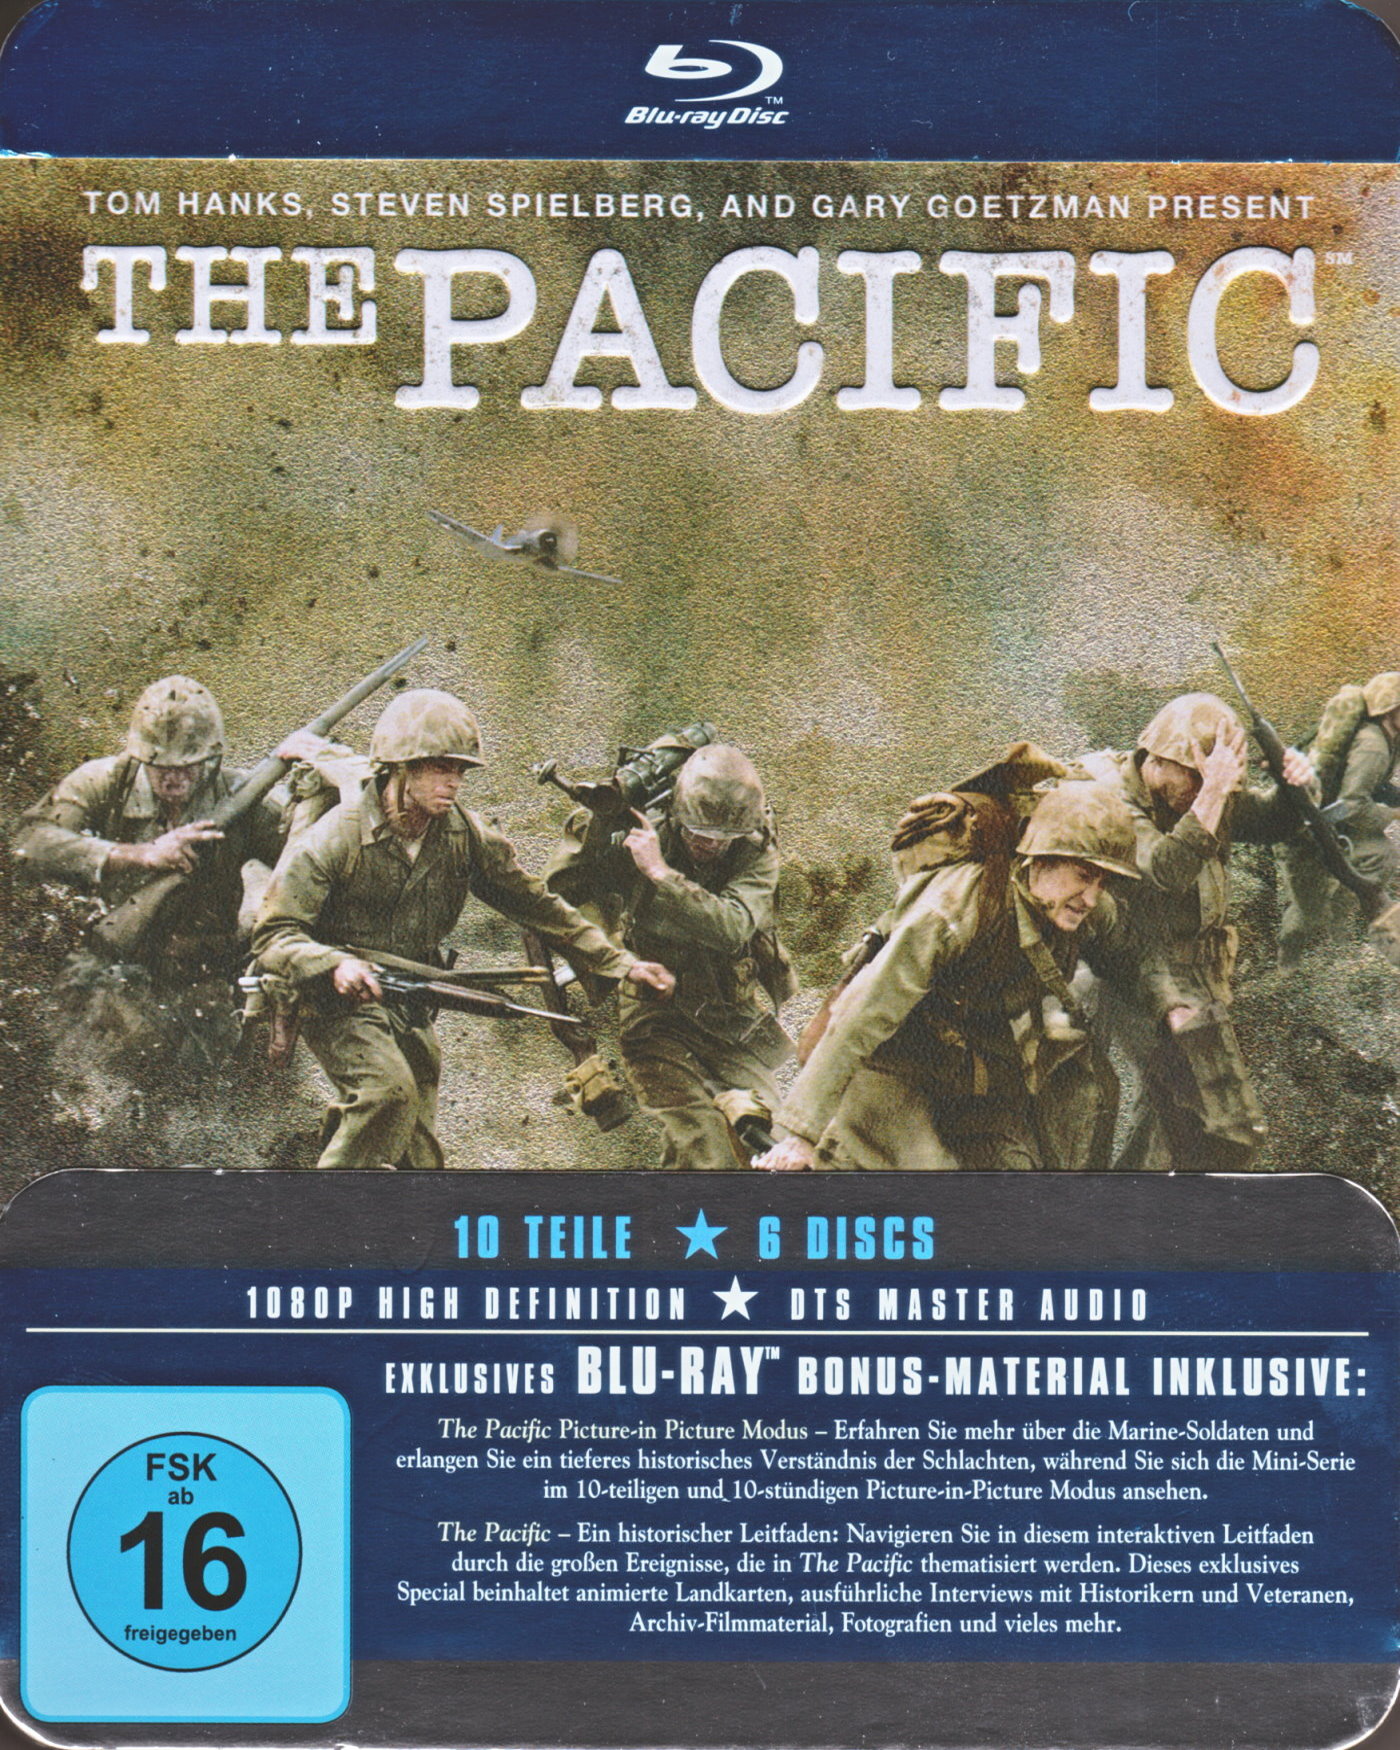 Cover - The Pacific.jpg